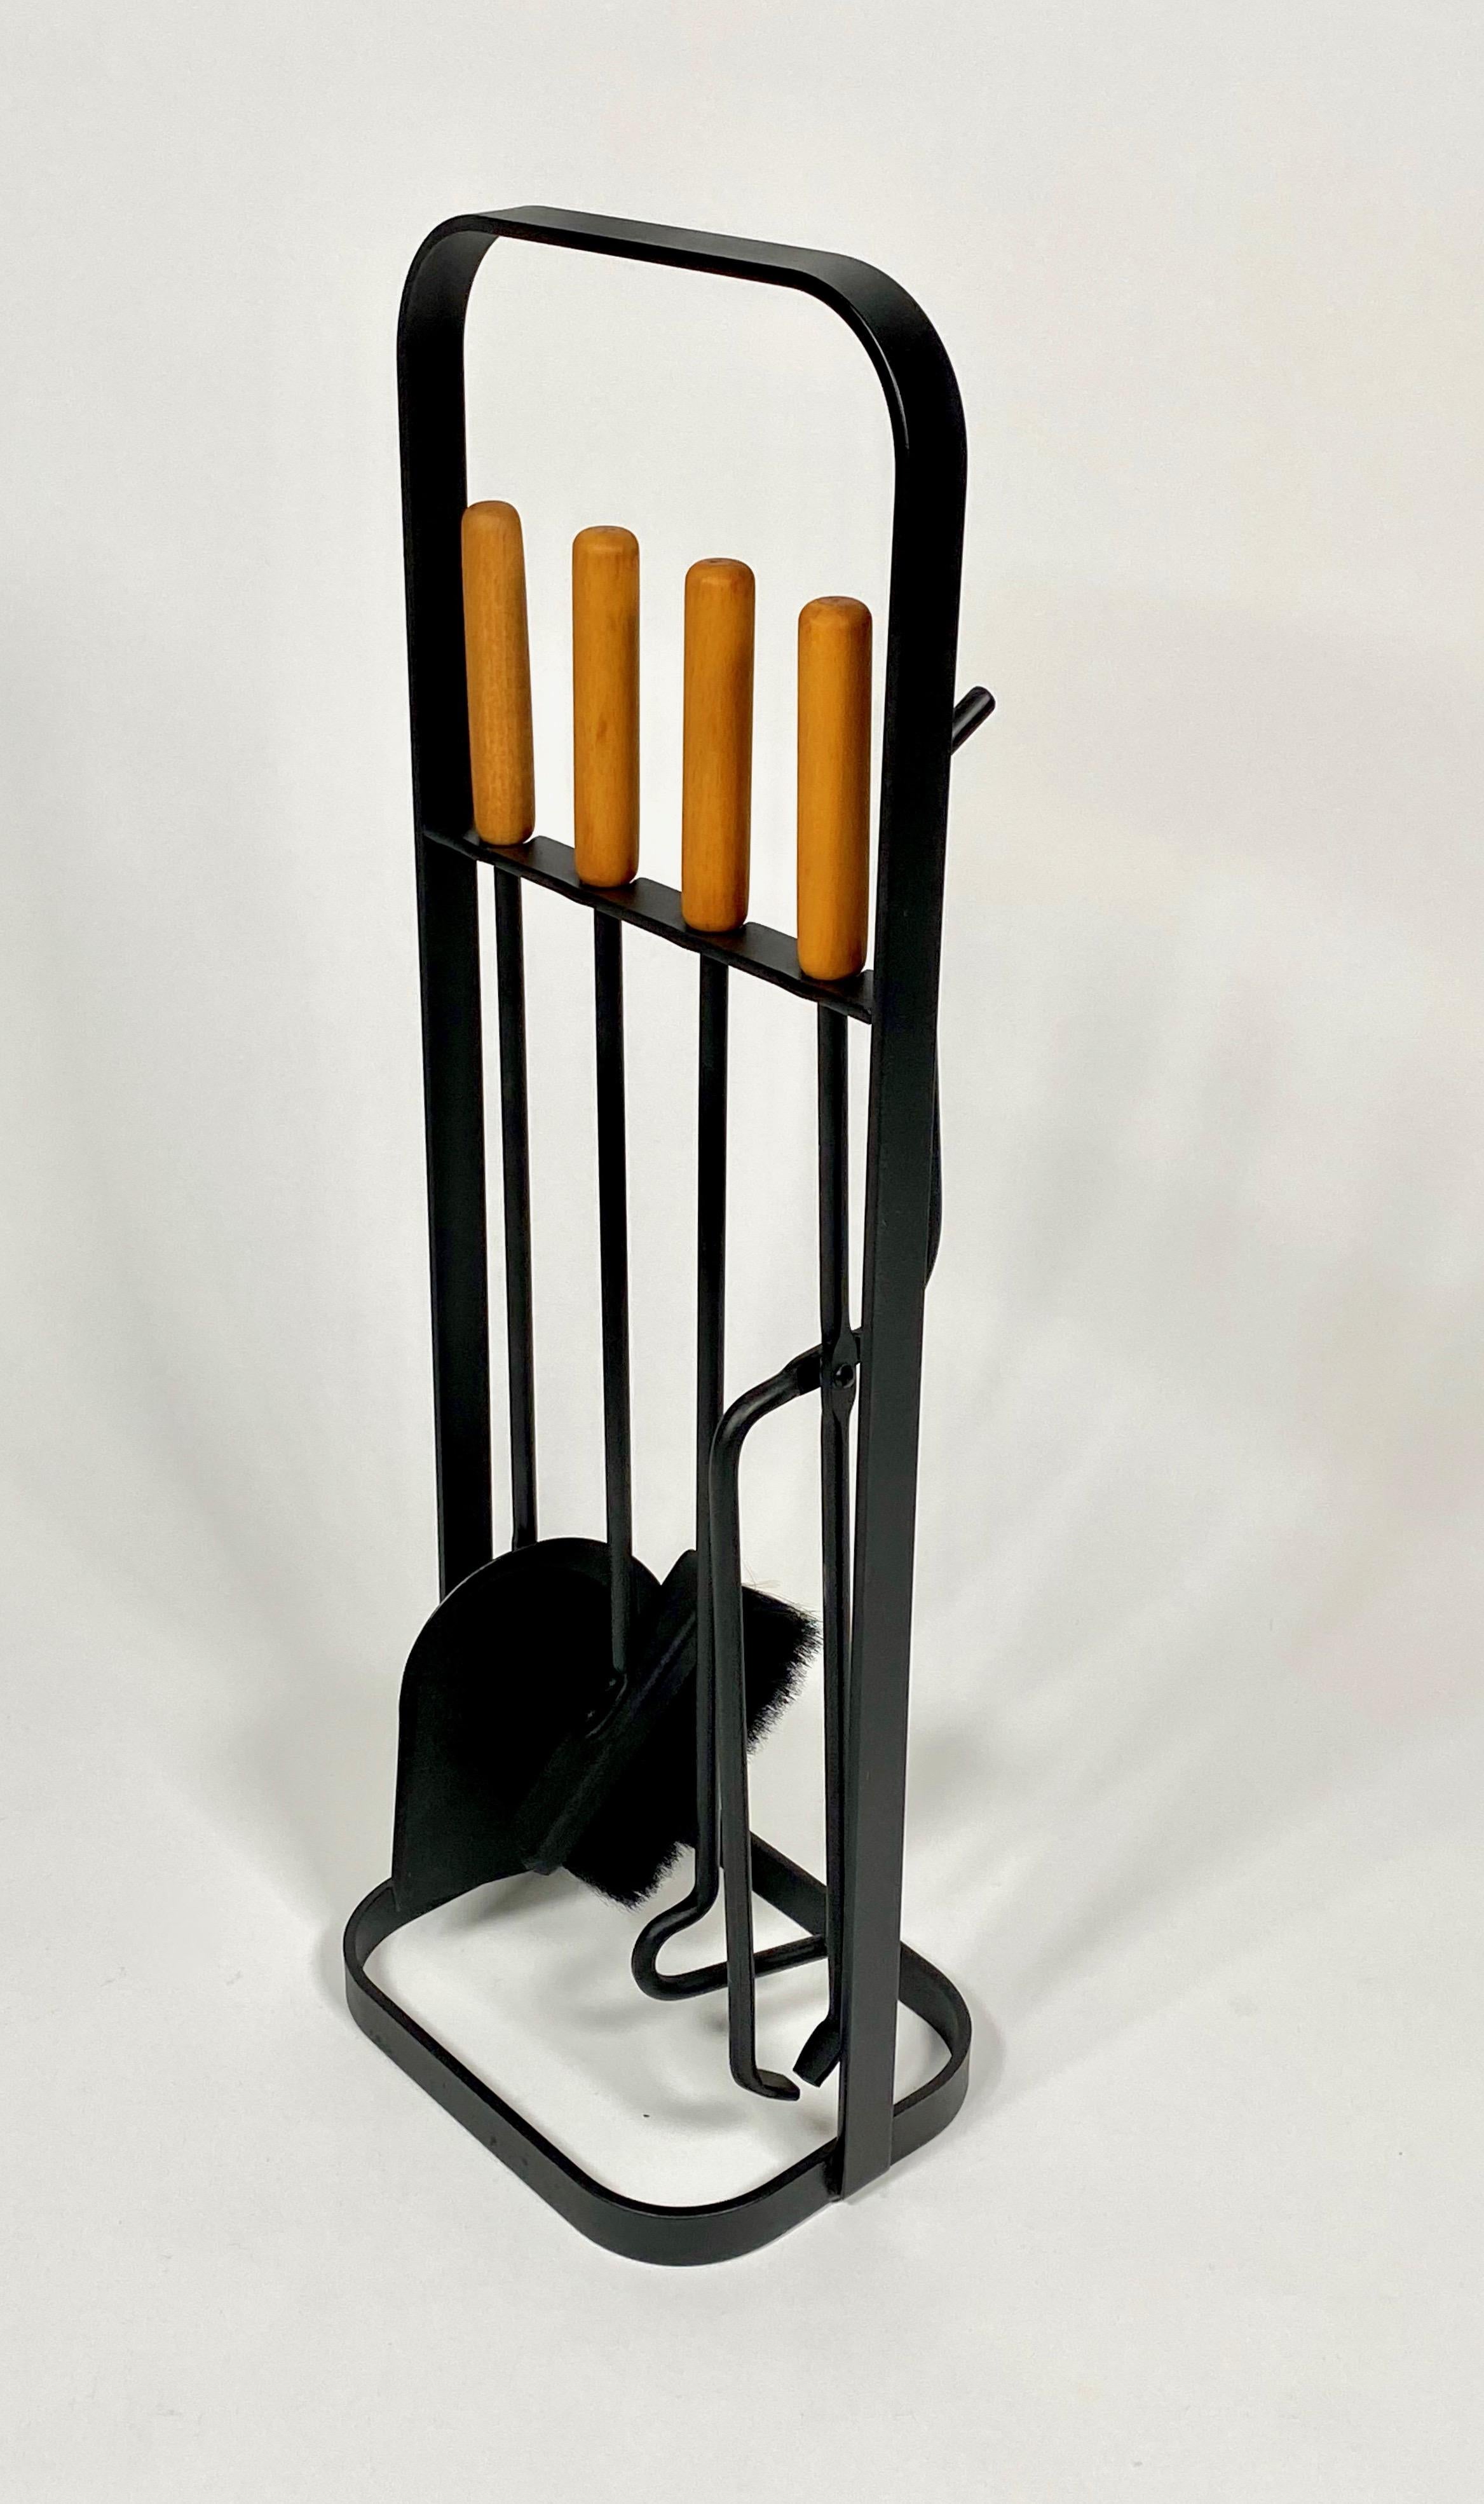 Hand-Crafted 1960s Modernist Fireplace Tools from Austria